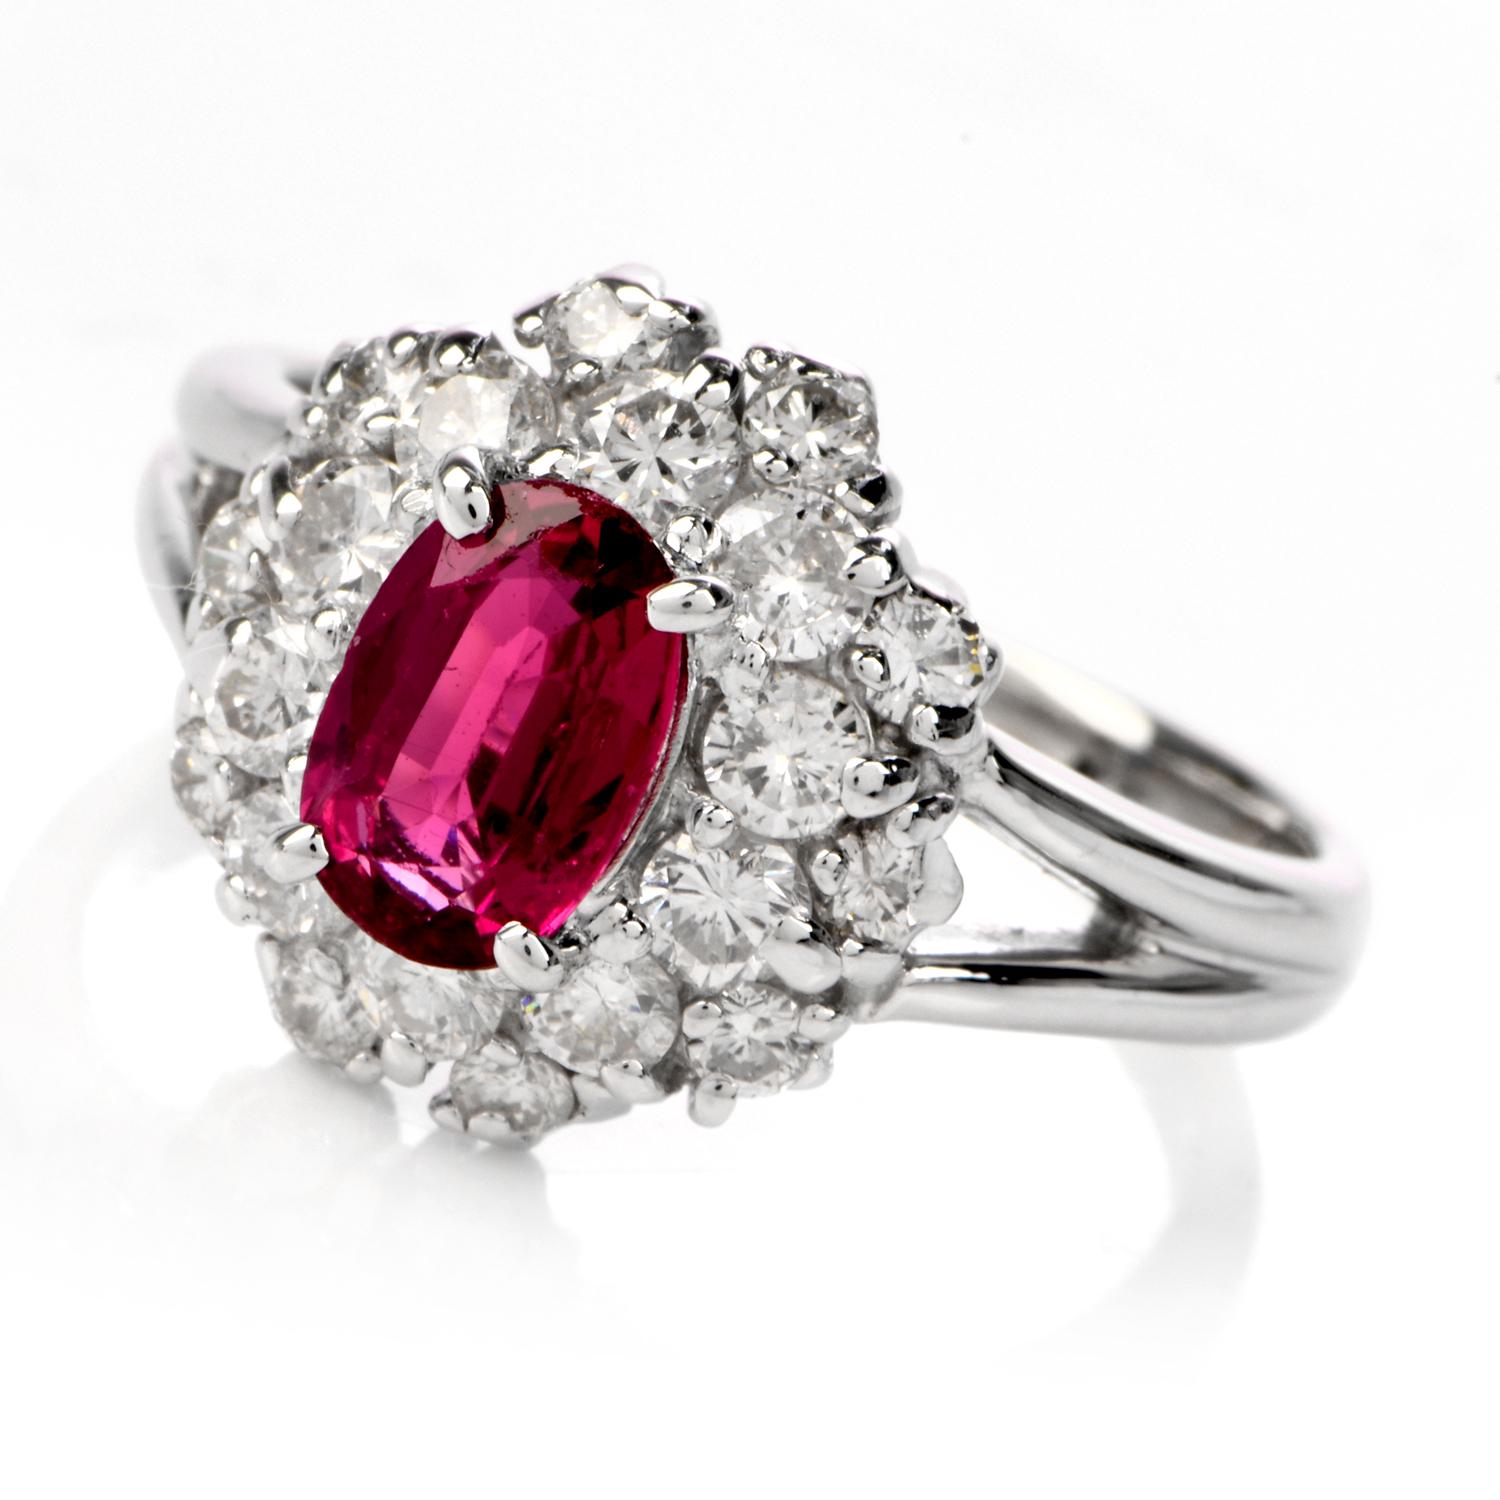 This beautiful ruby and diamond ring is crafted in solid platinum, weighing 6.5 grams and measuring 12mm x 6mm high. Centered with one oval shaped prong-set ruby, weighing approximately 0.96 carats. Further accented by a clustered halo of 22